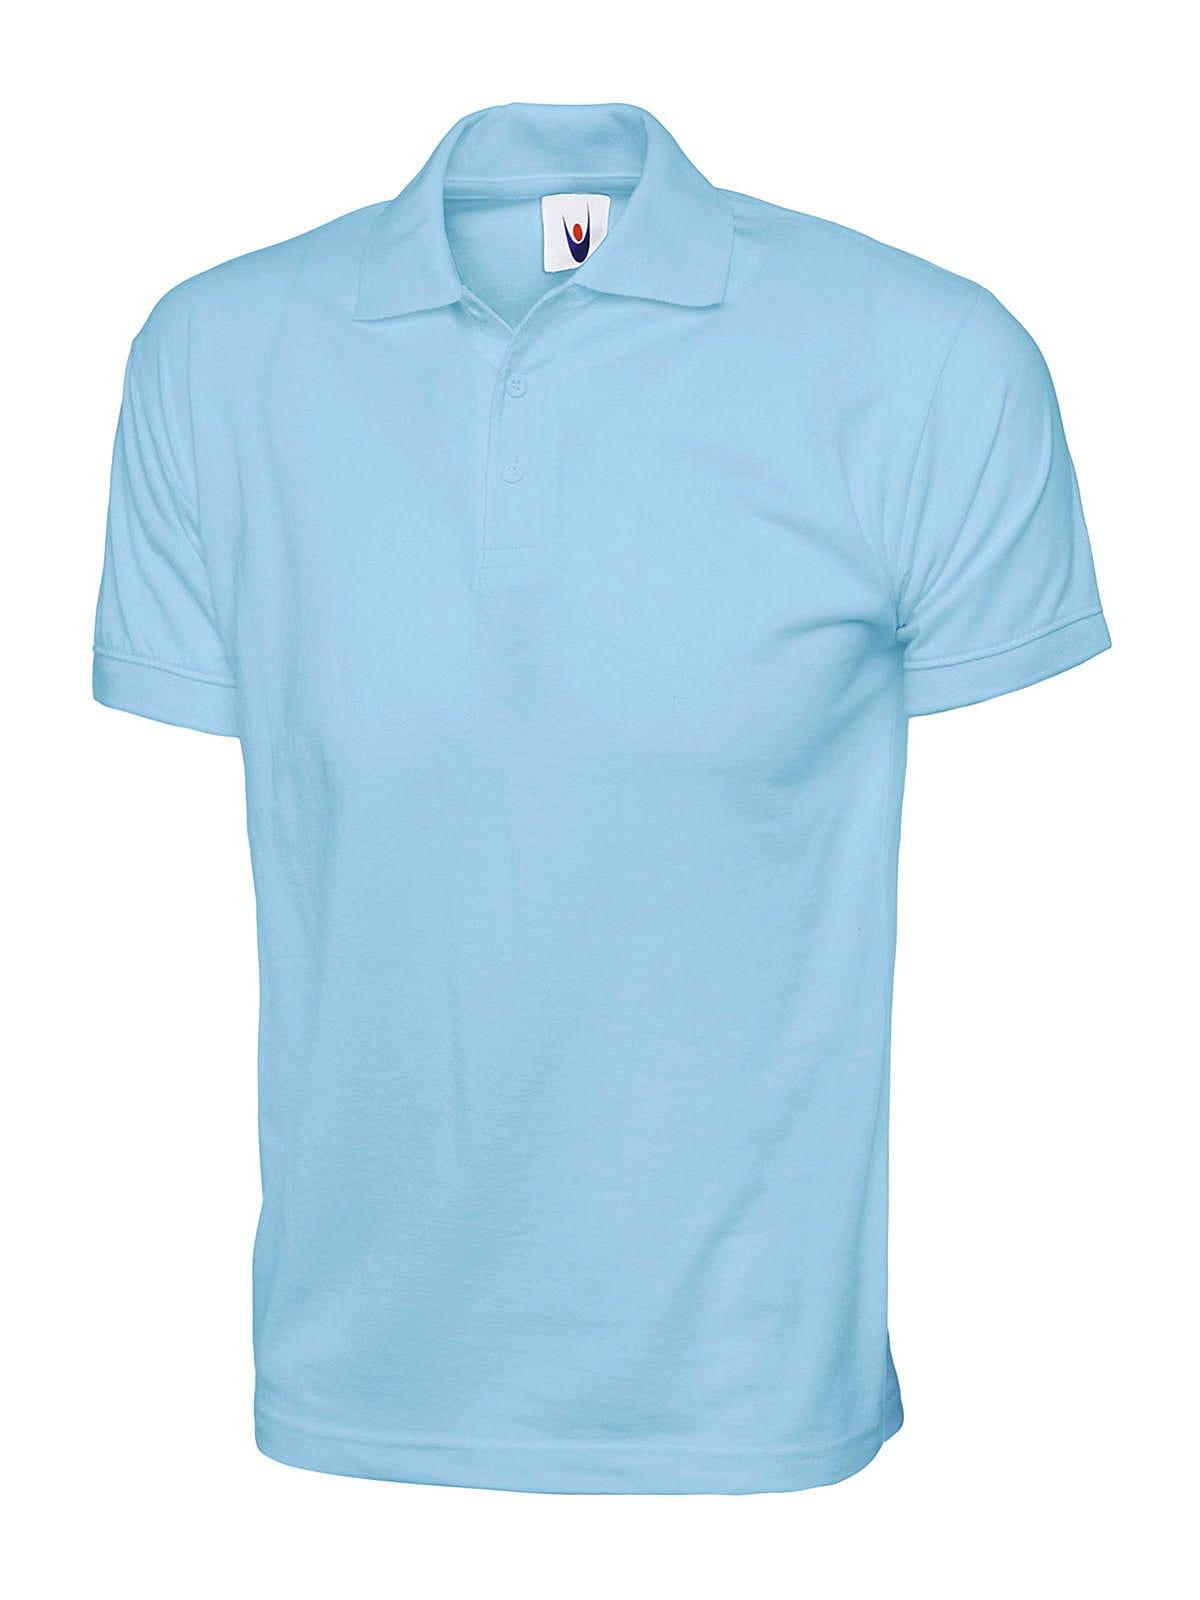 Uneek 200GSM Jersey Polo Shirt in Sky (Product Code: UC122)